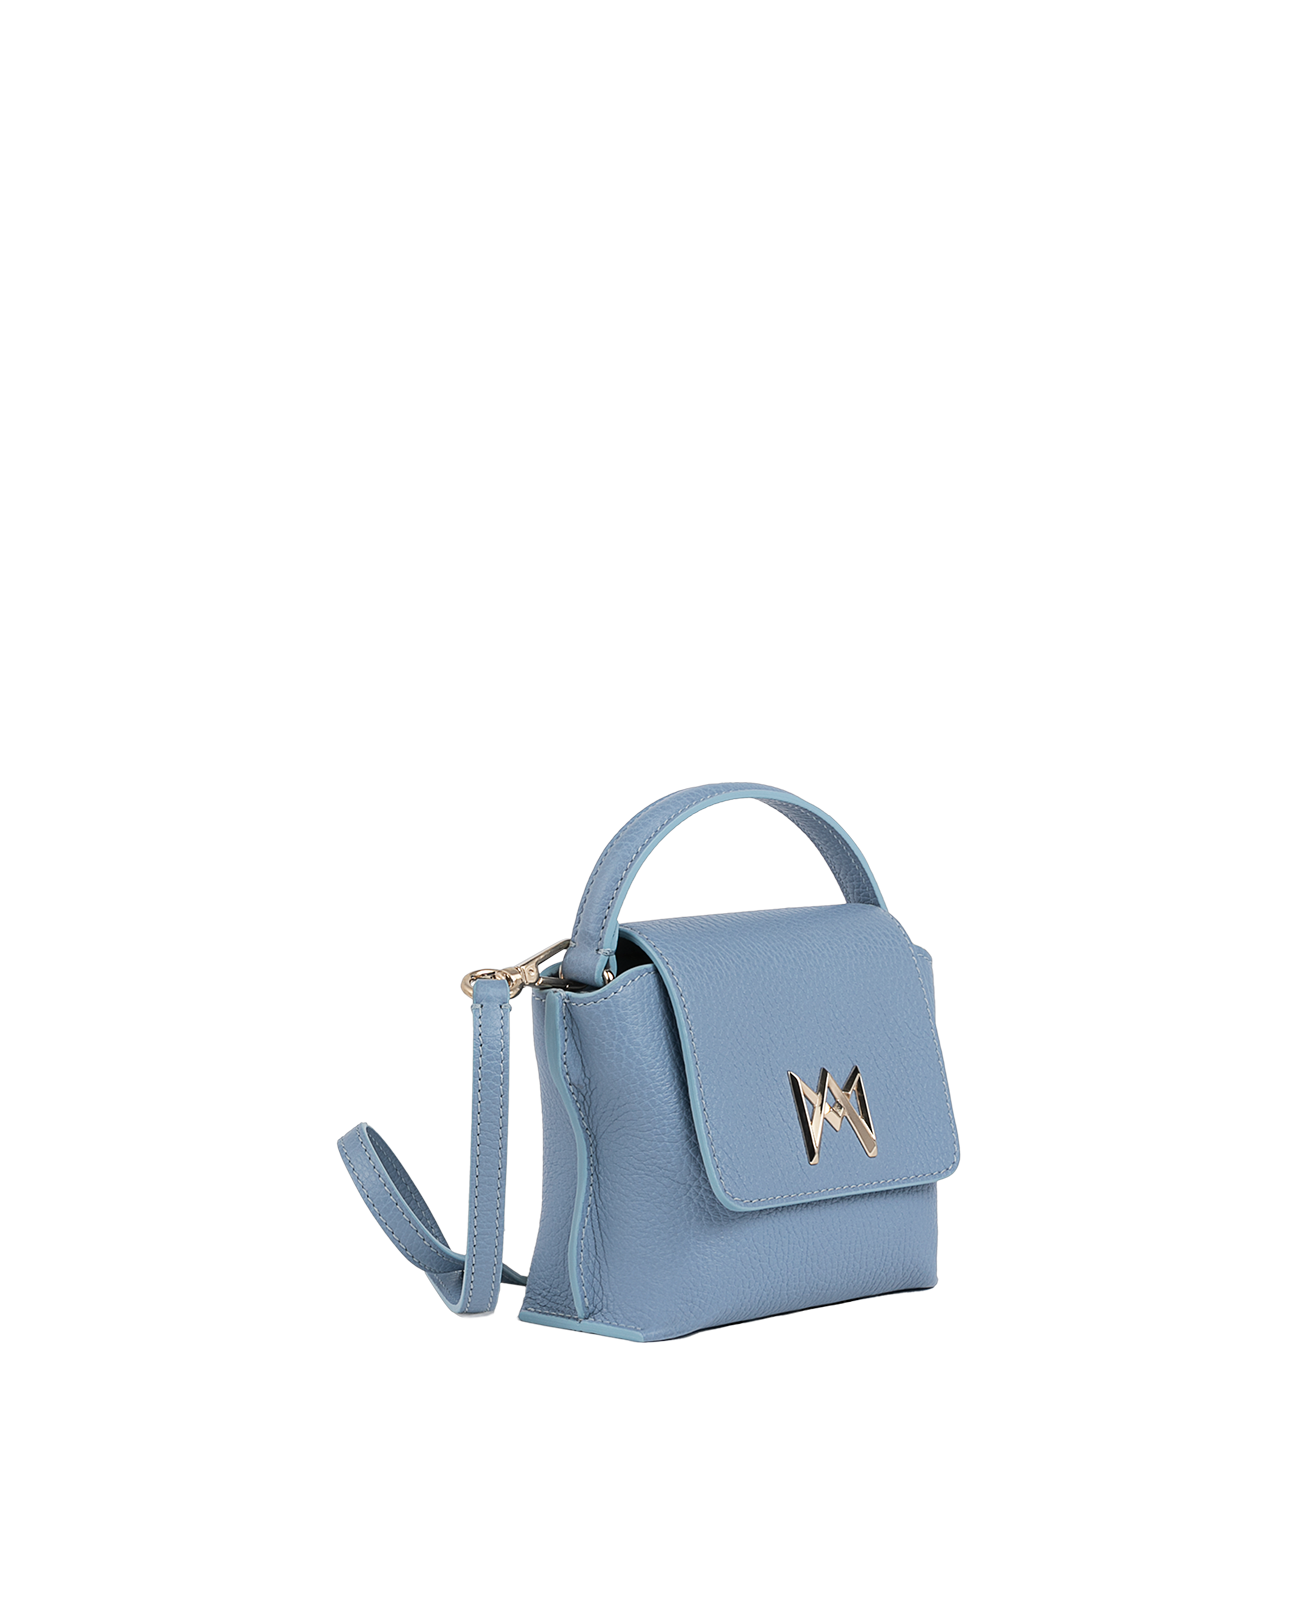 Cross-body bag in Italian full-grain leather, semi-aniline calf Italian leather with detachable shoulder strap.Three compartments, zip pocket in the back compartment. Magnetic flap closure with logo. Color: Baby Blue. Size:Mini